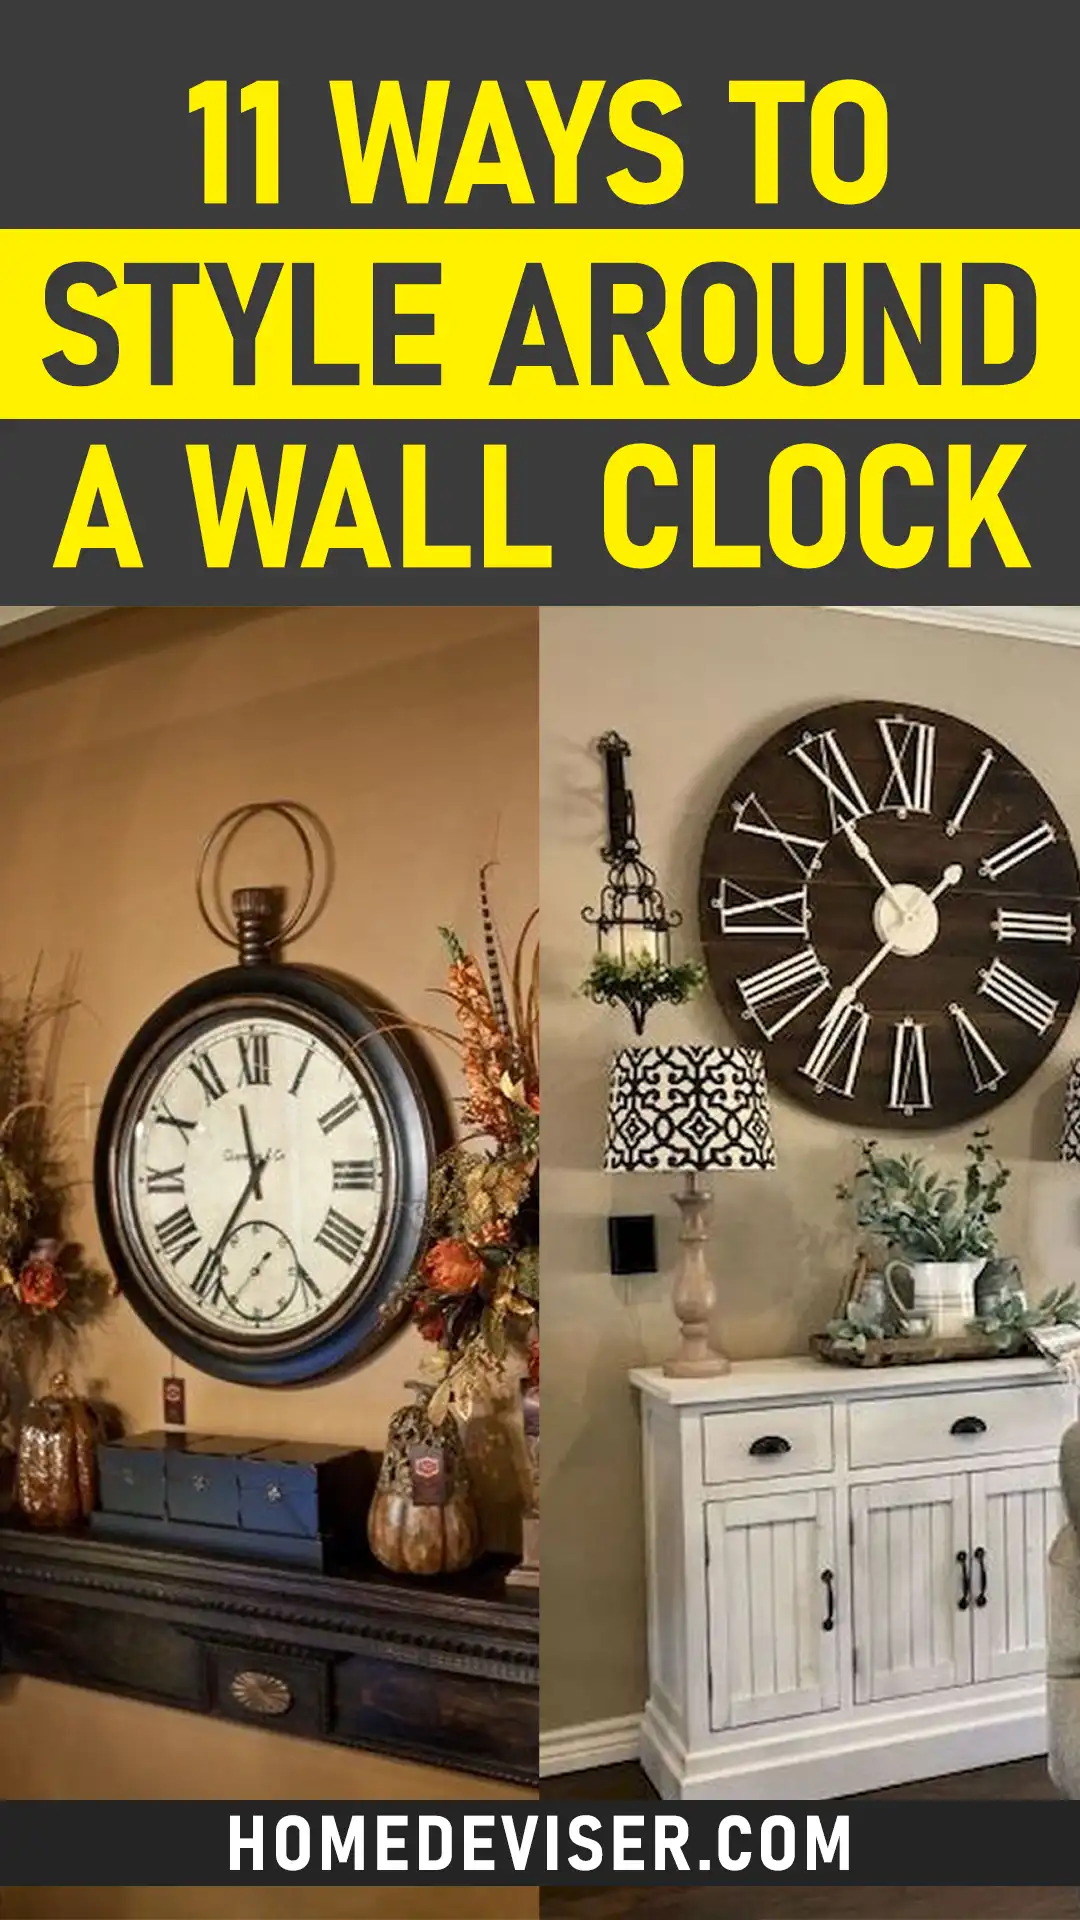 How To Decorate Around a Wall Clock